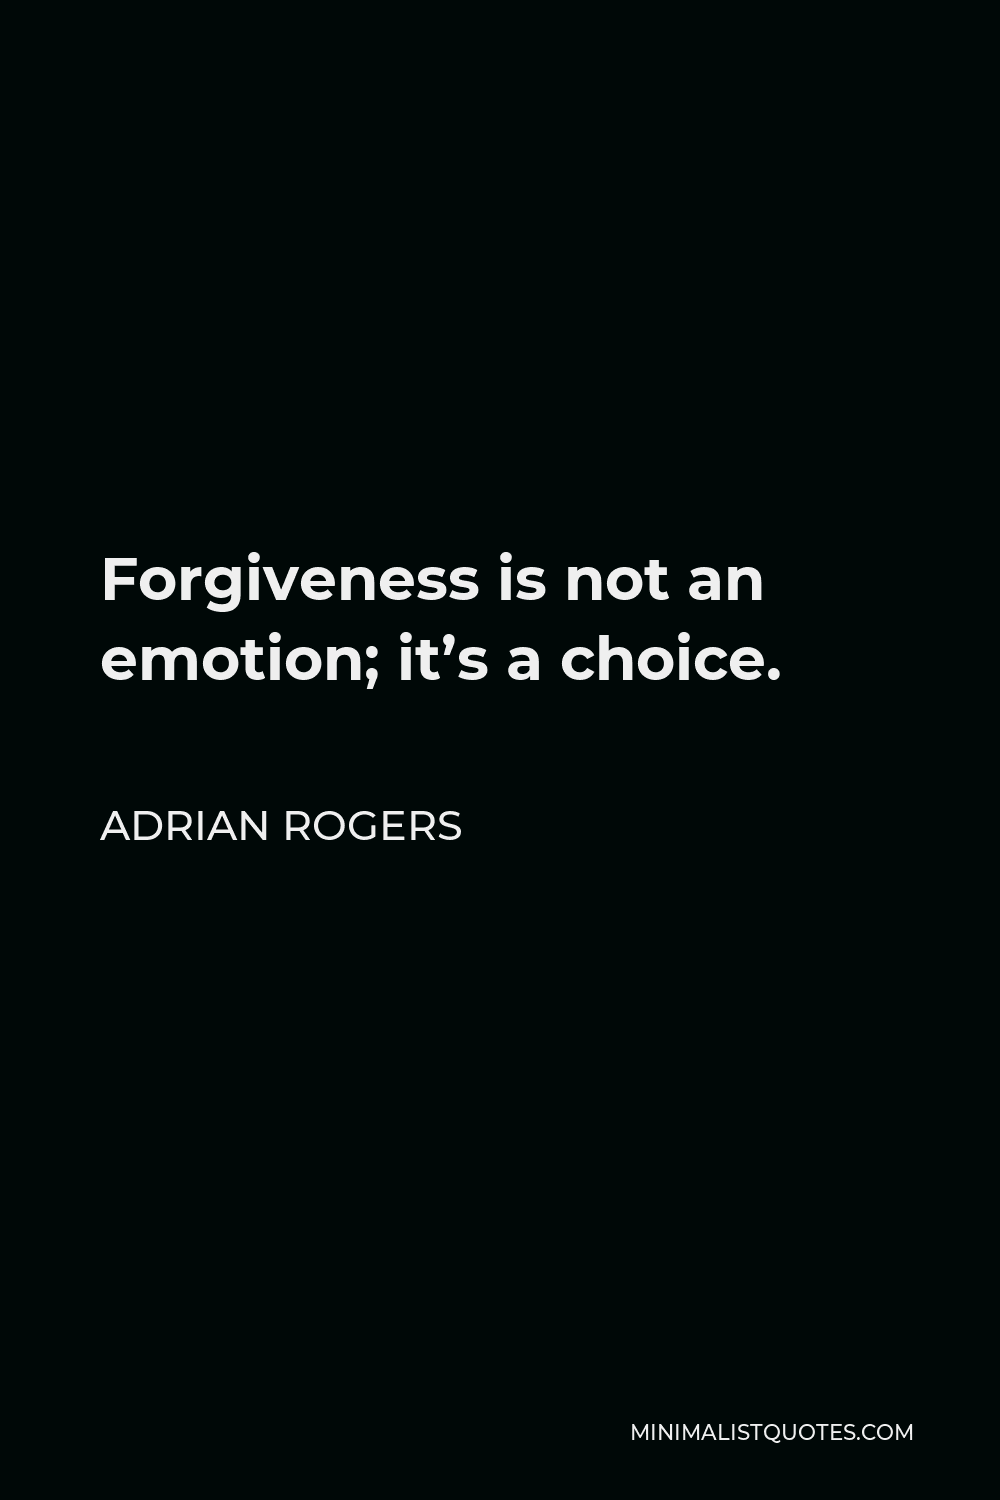 Adrian Rogers Quote - Forgiveness is not an emotion; it’s a choice.